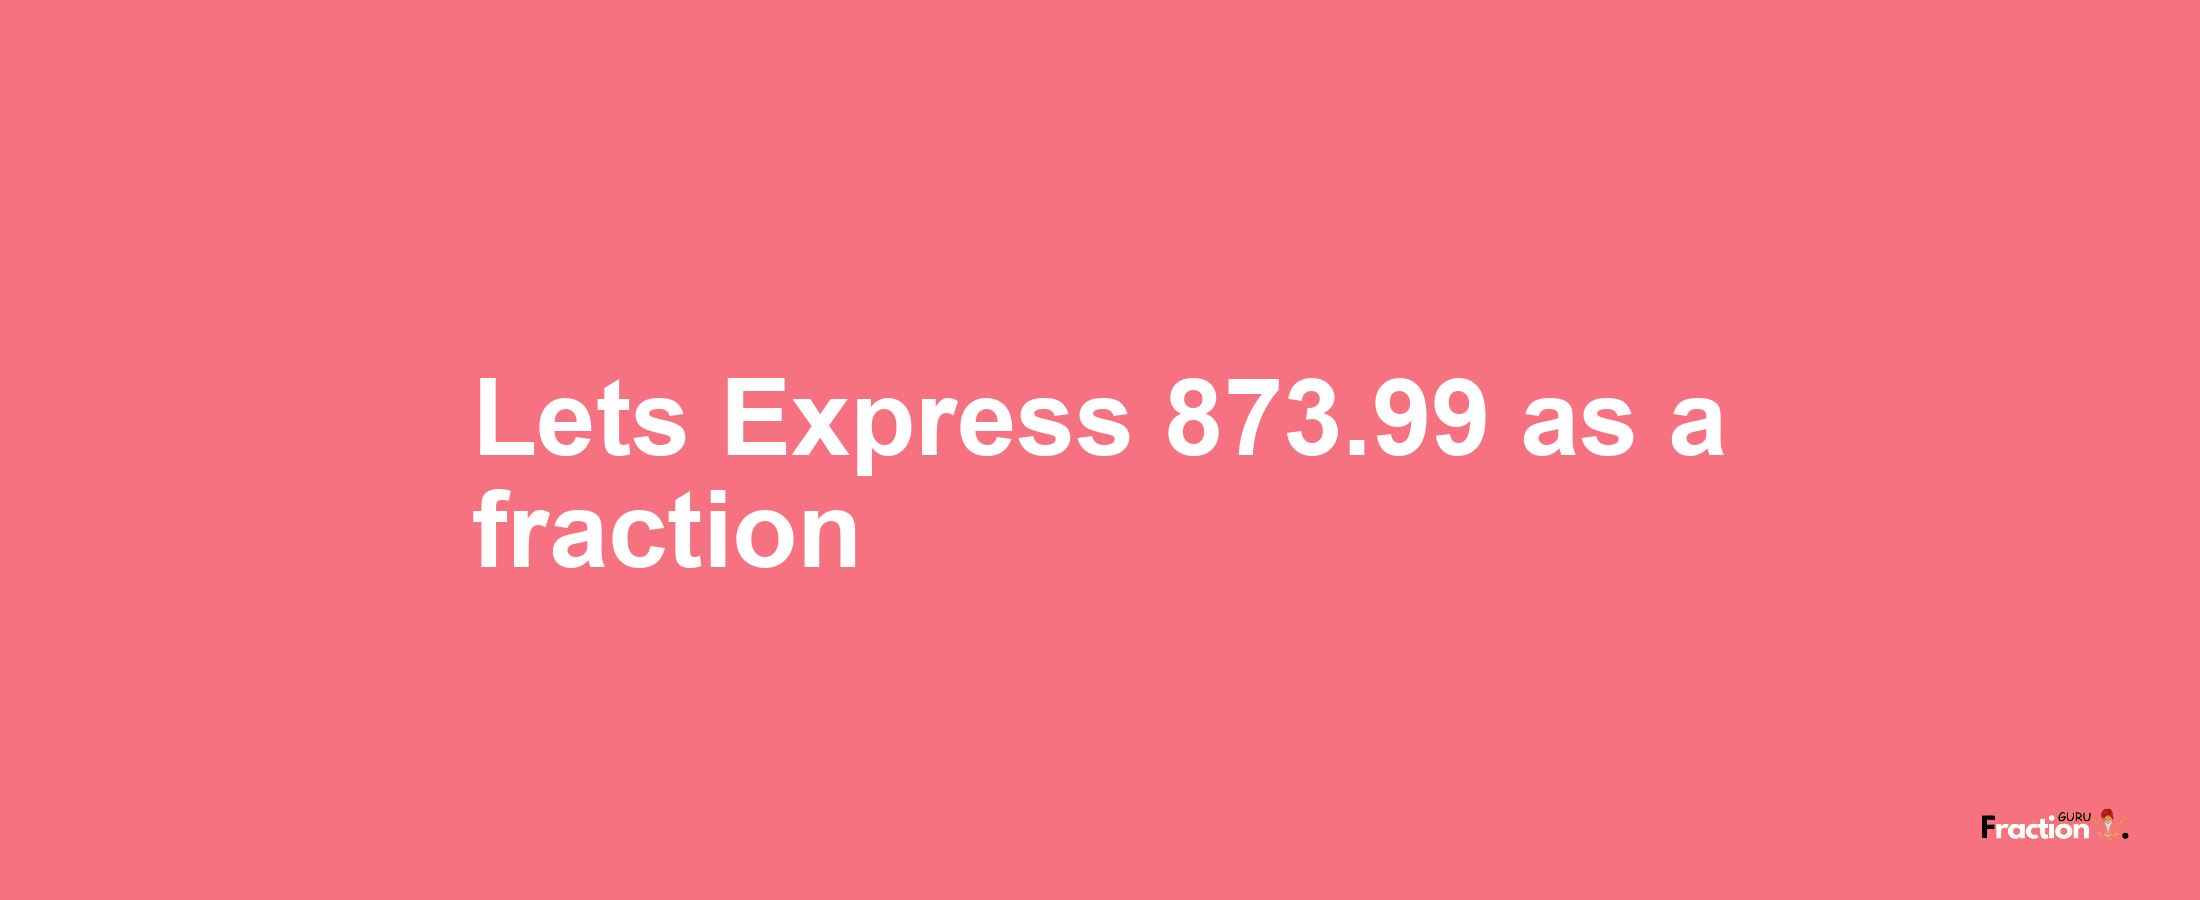 Lets Express 873.99 as afraction